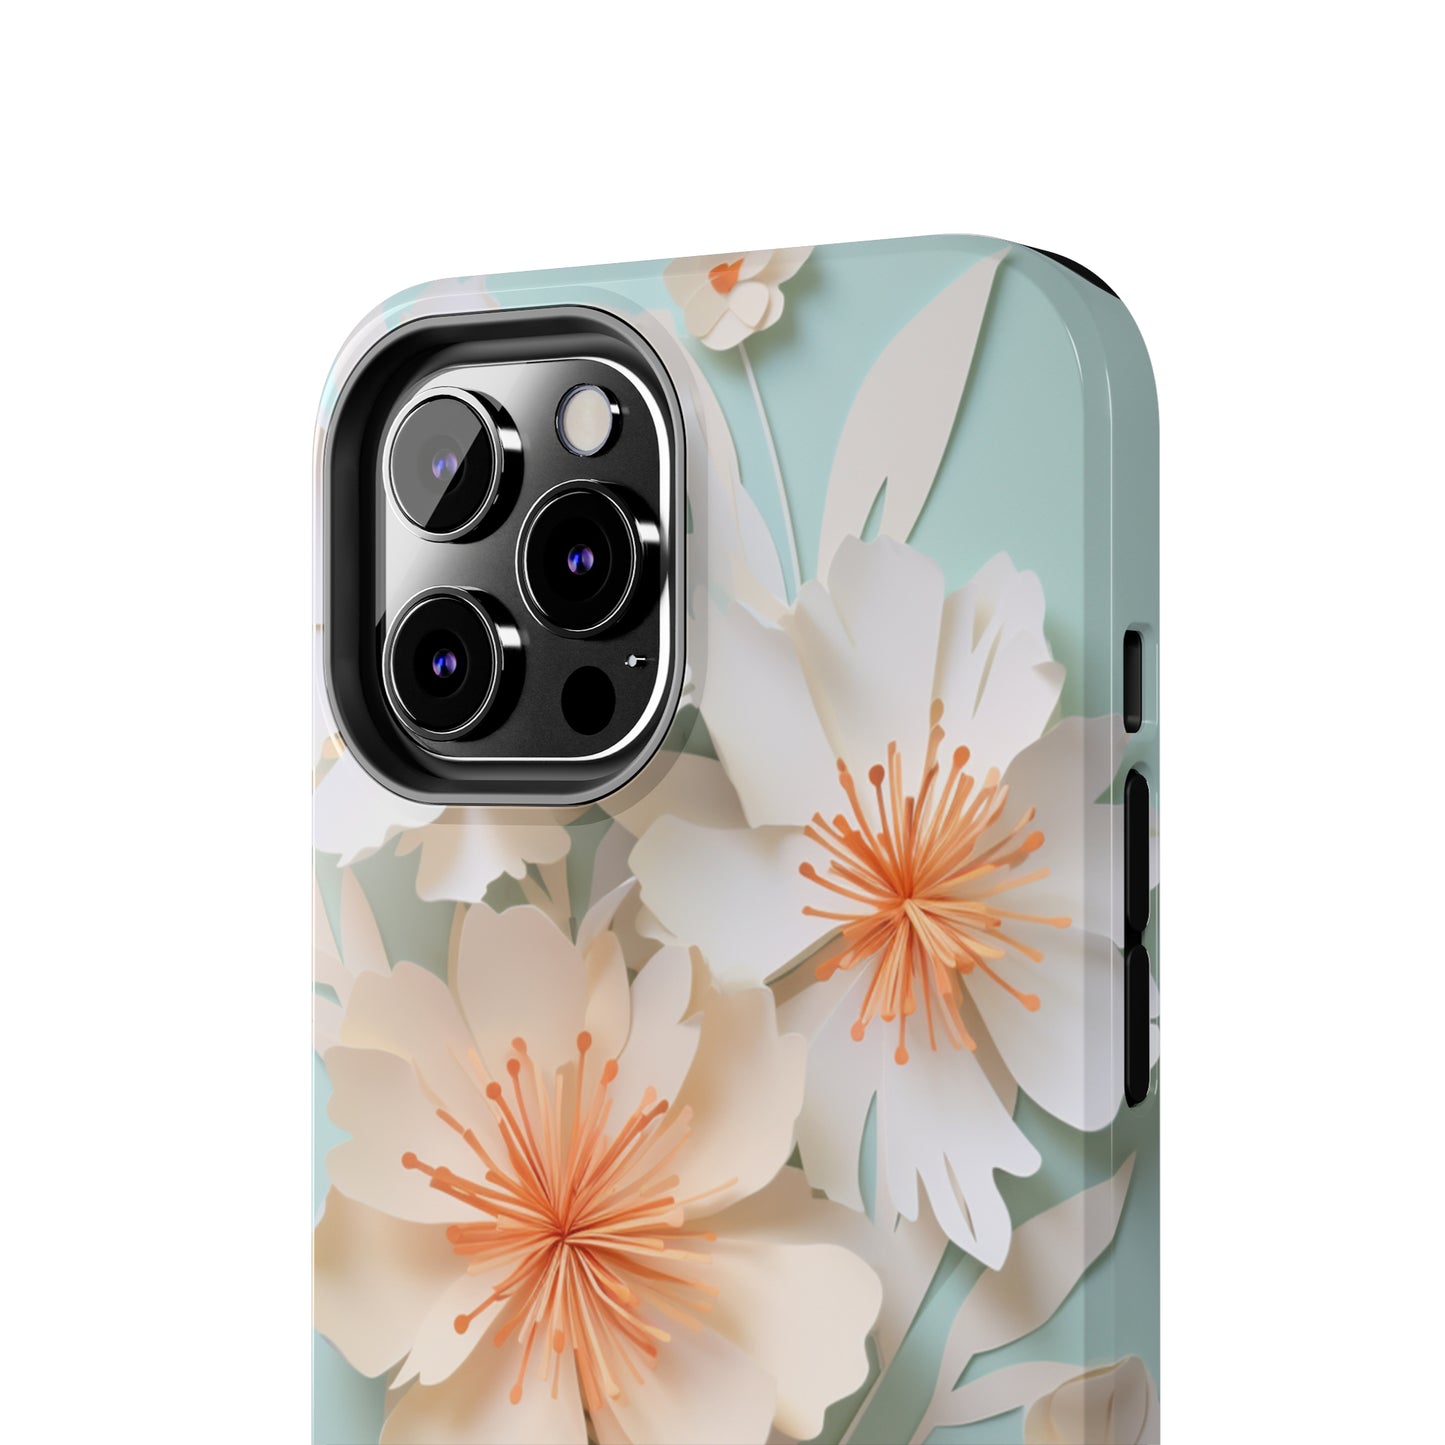 Elegant Paper Floral Design Case for iPhones - A Touch of Nature's Beauty